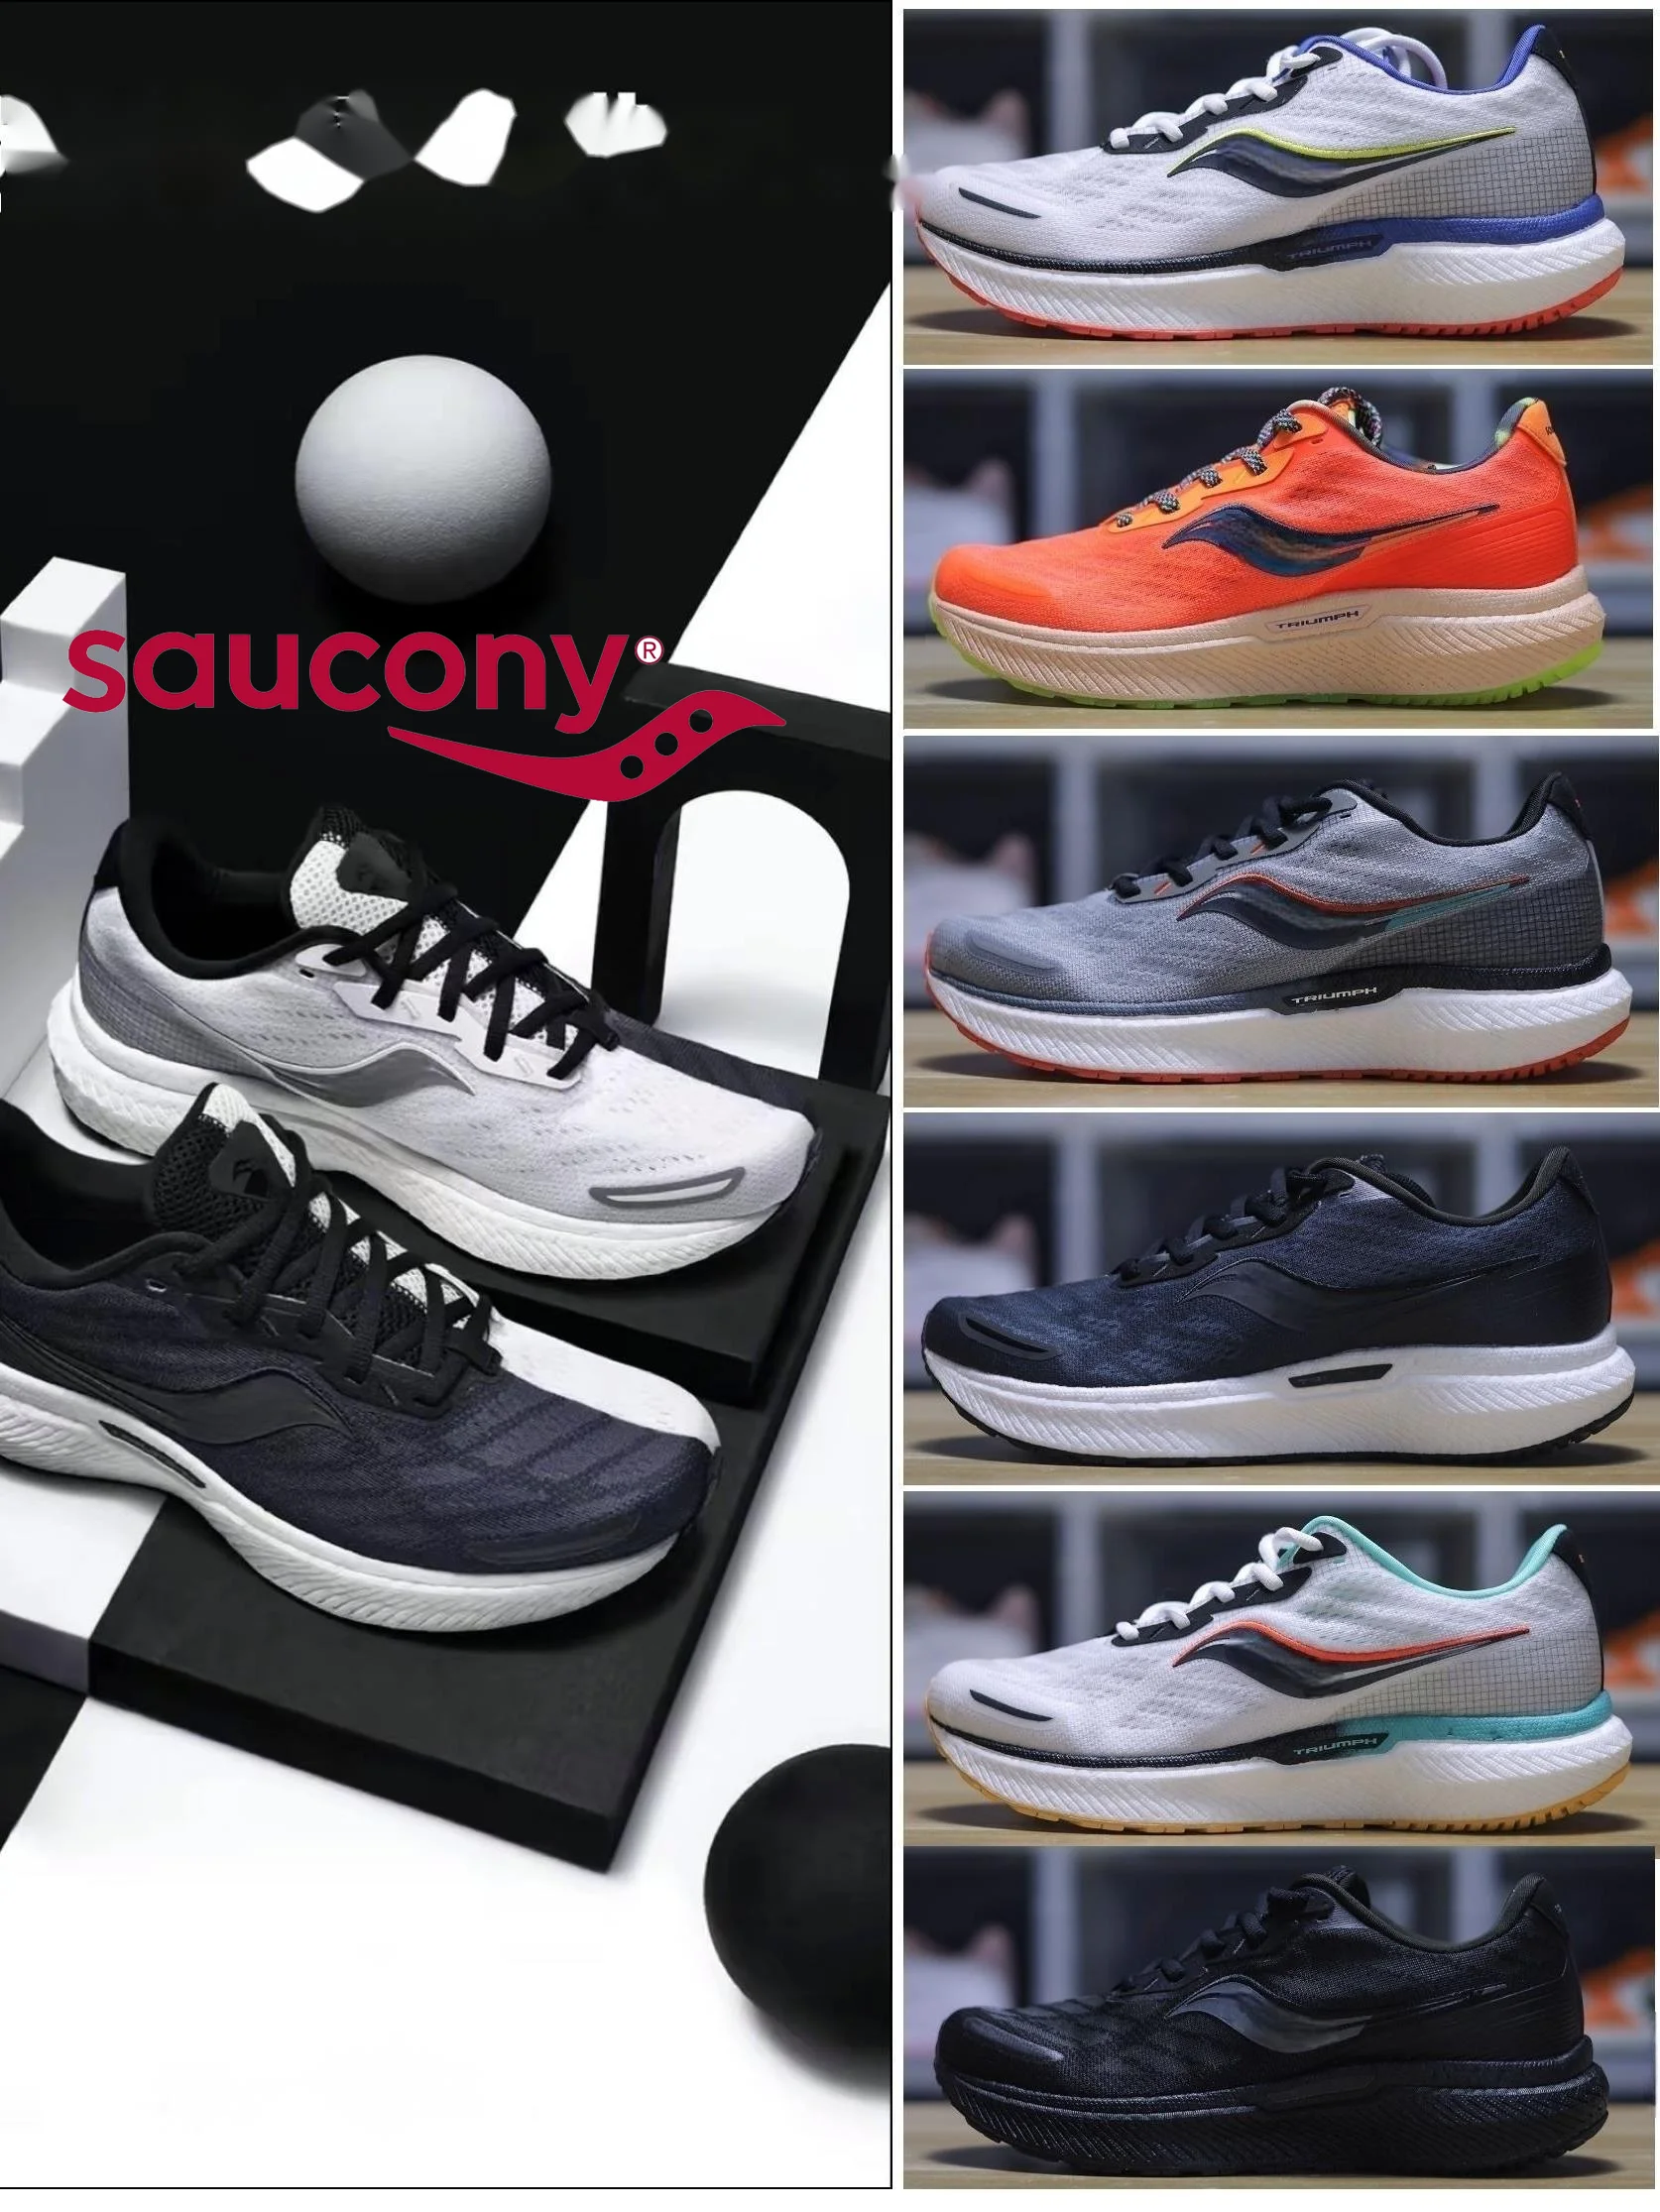 

Saucony Classic Triumph 19 Men Shock Absorption Popcorn Outsole Casual Running Shoes Women Runner Jogging Lightweight Sneakers